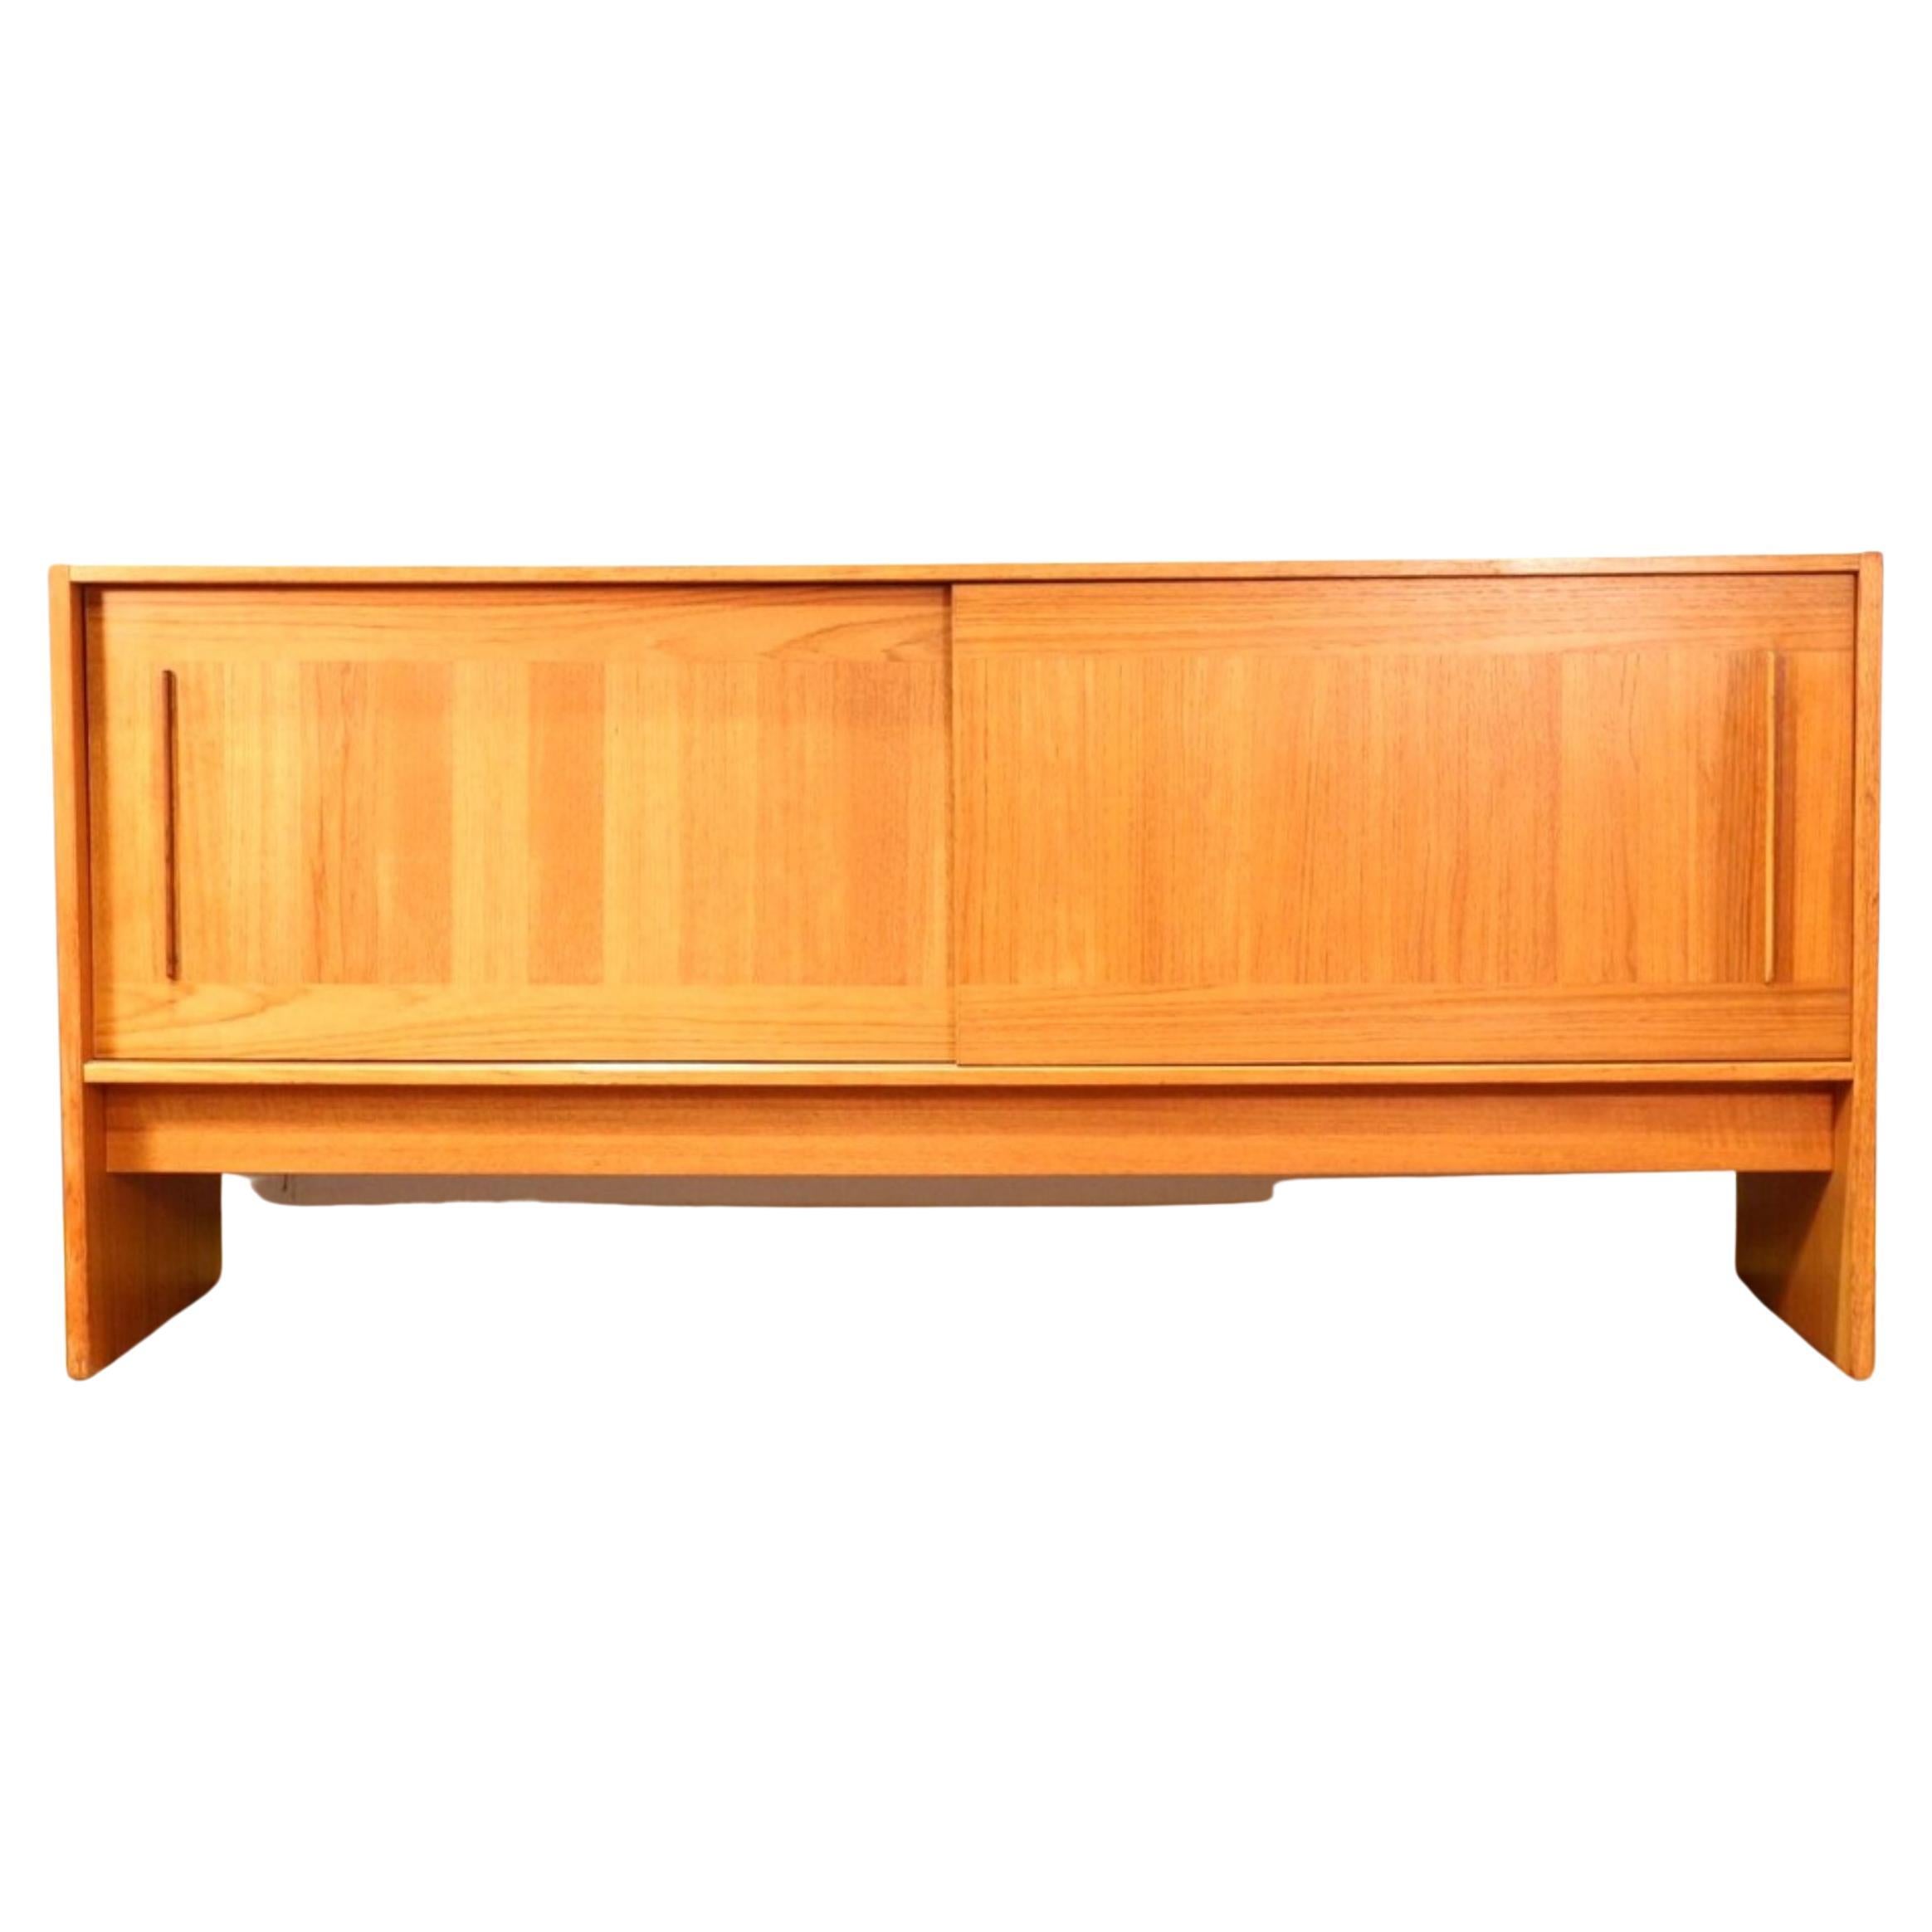 A gorgeous mid-century credenza by Danish designer Gangso Mobler with brilliant storage space that would look great in any space. This piece has great sliding door and signature tiled top which was synonymous with this designer. It is a true